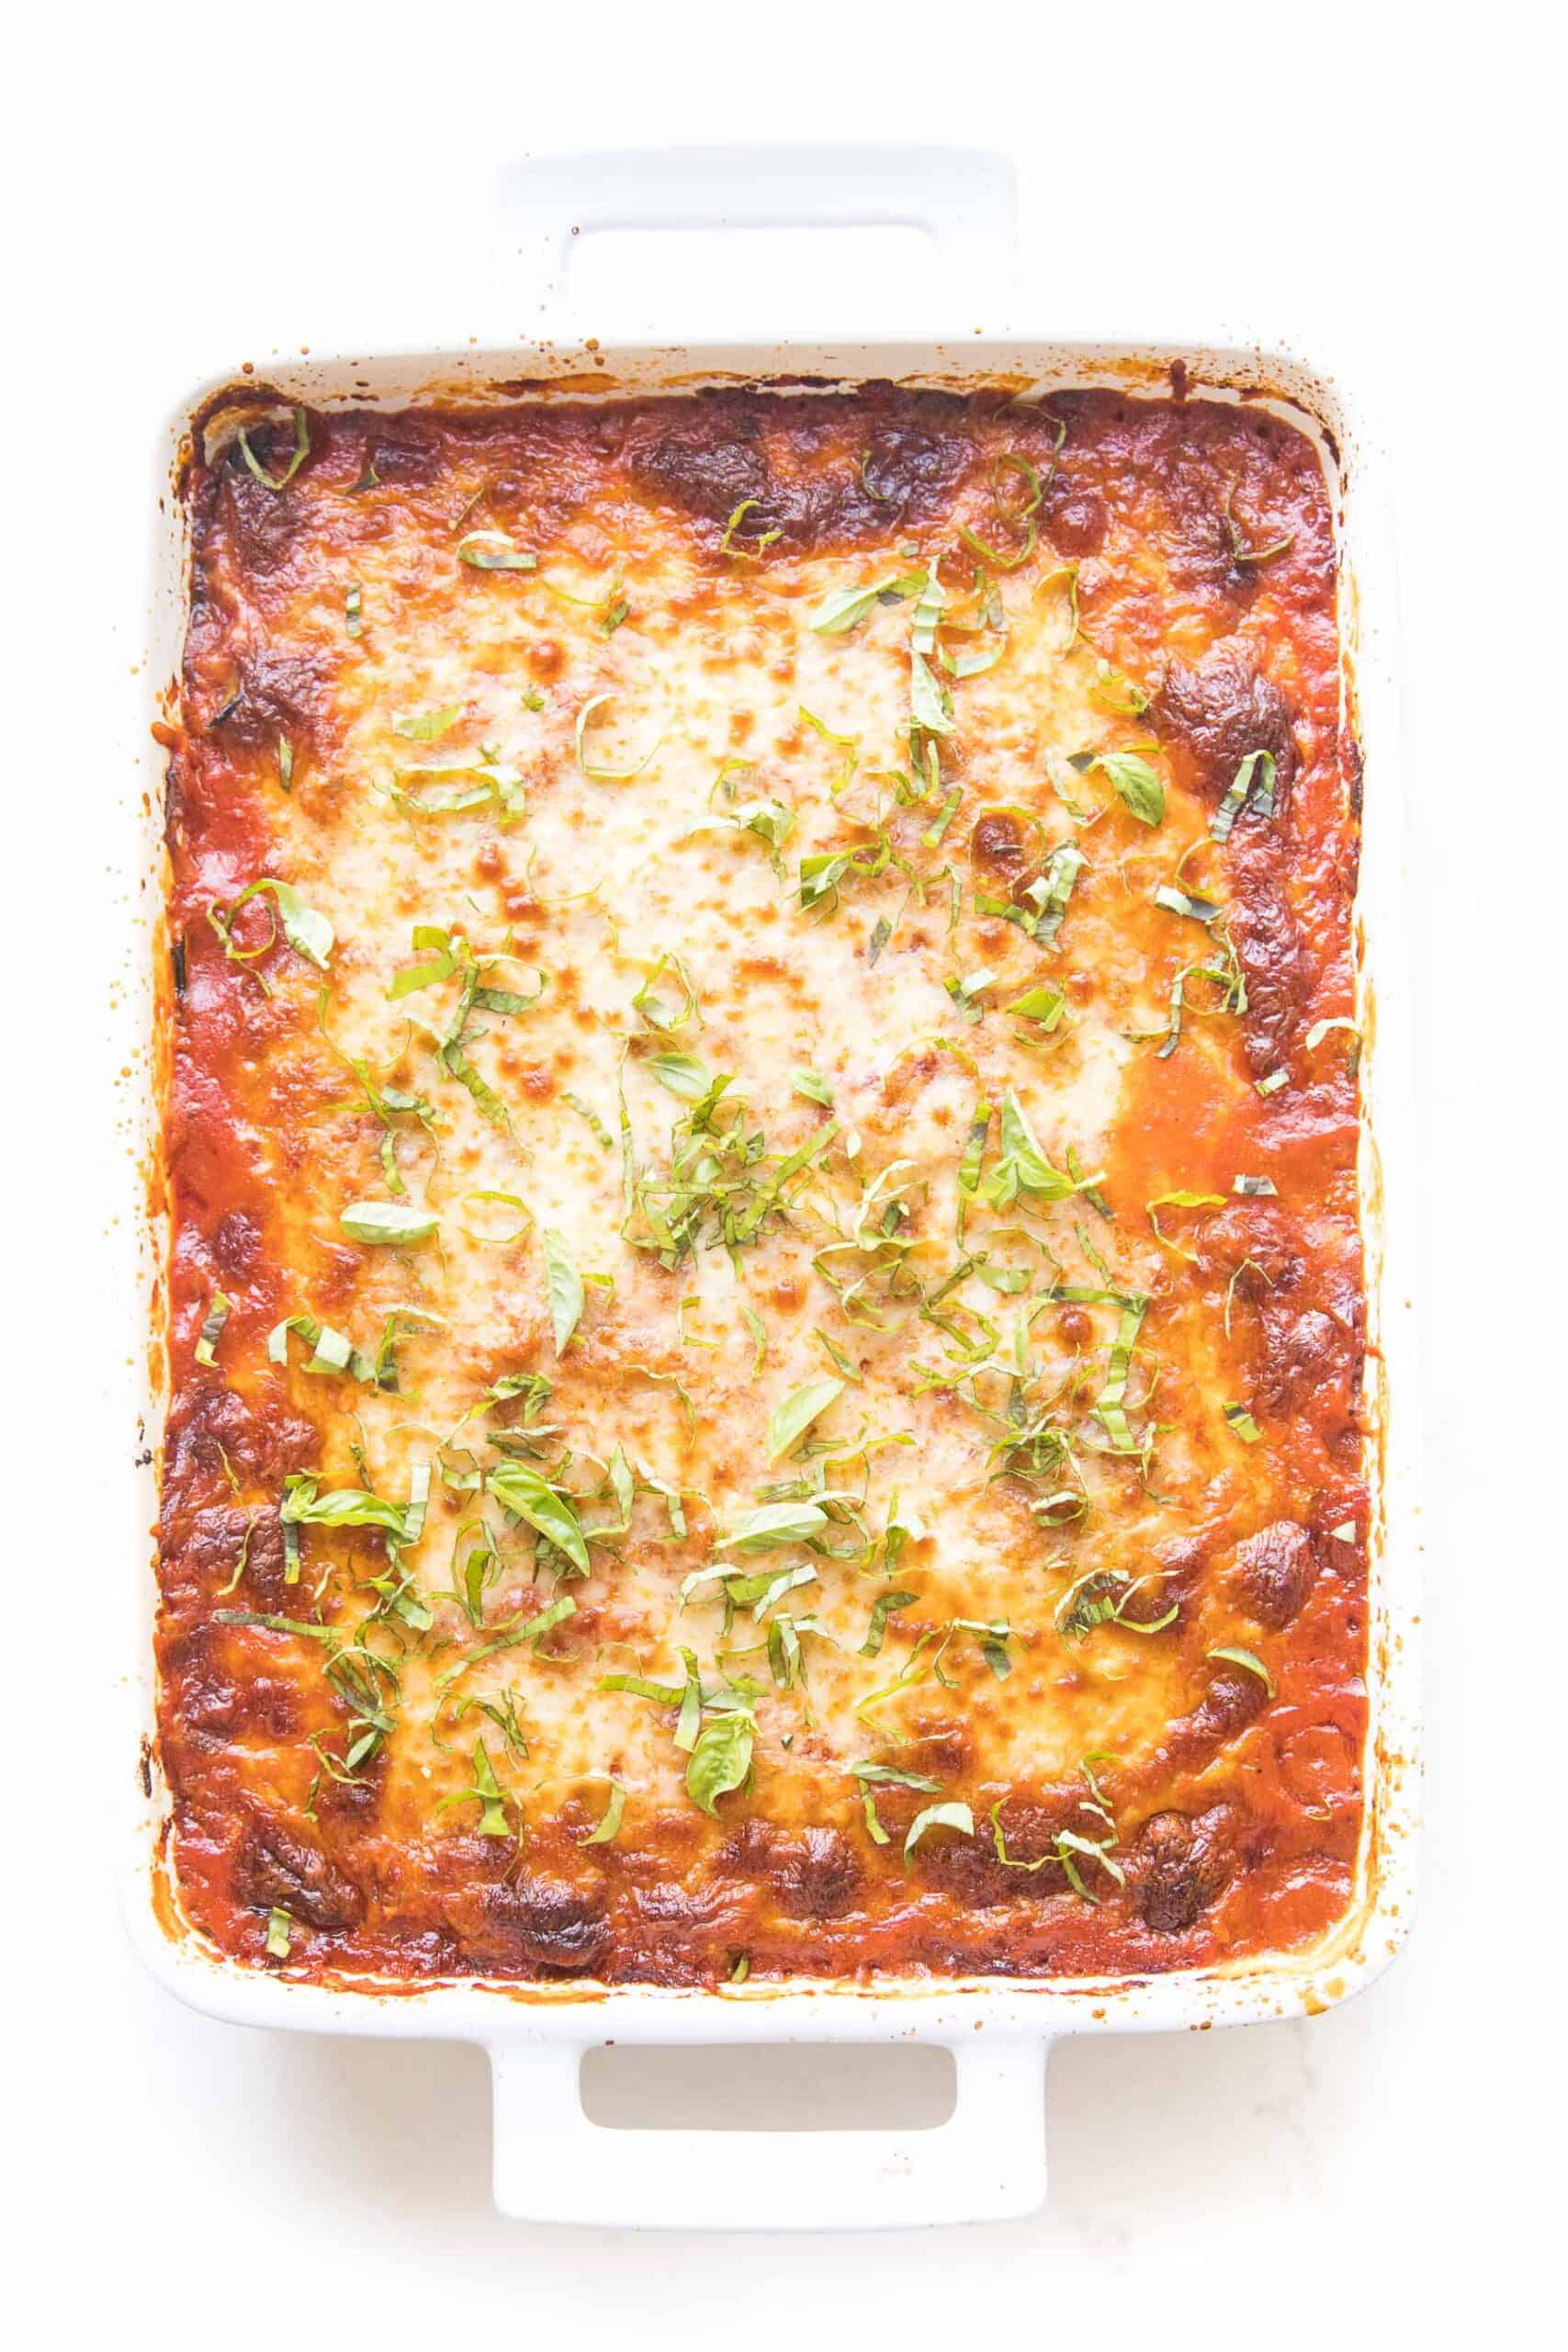 keto low carb lasagna made with zucchini noodles in a white baking dish topped with basil